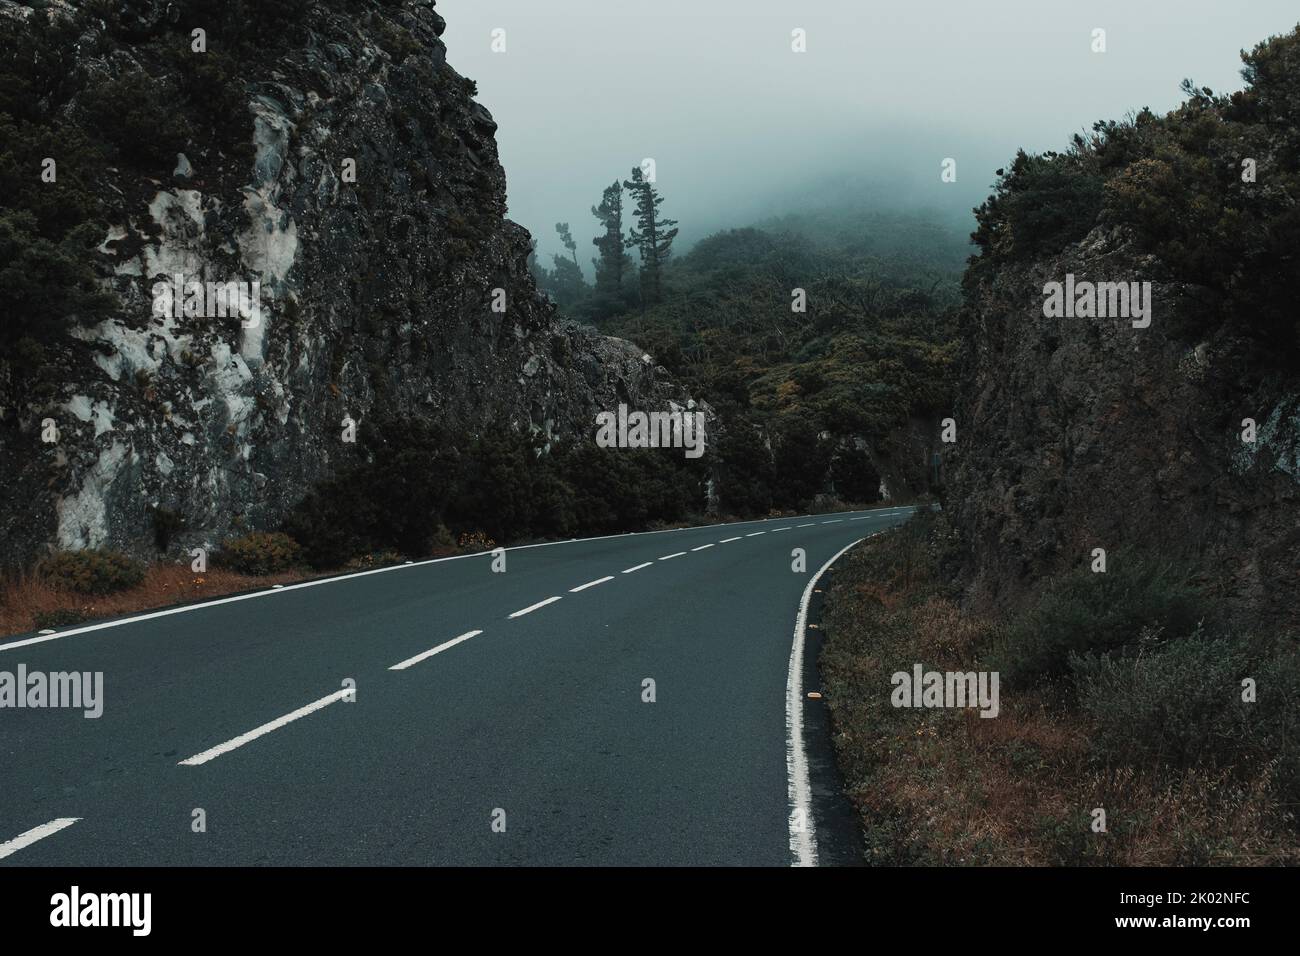 Destination and travel on the road concept. Long ashpalt straight road with scenic mountains and forest around. Outdoors driving journey. Vehicle transportation and amazing holiday vacation spot Stock Photo